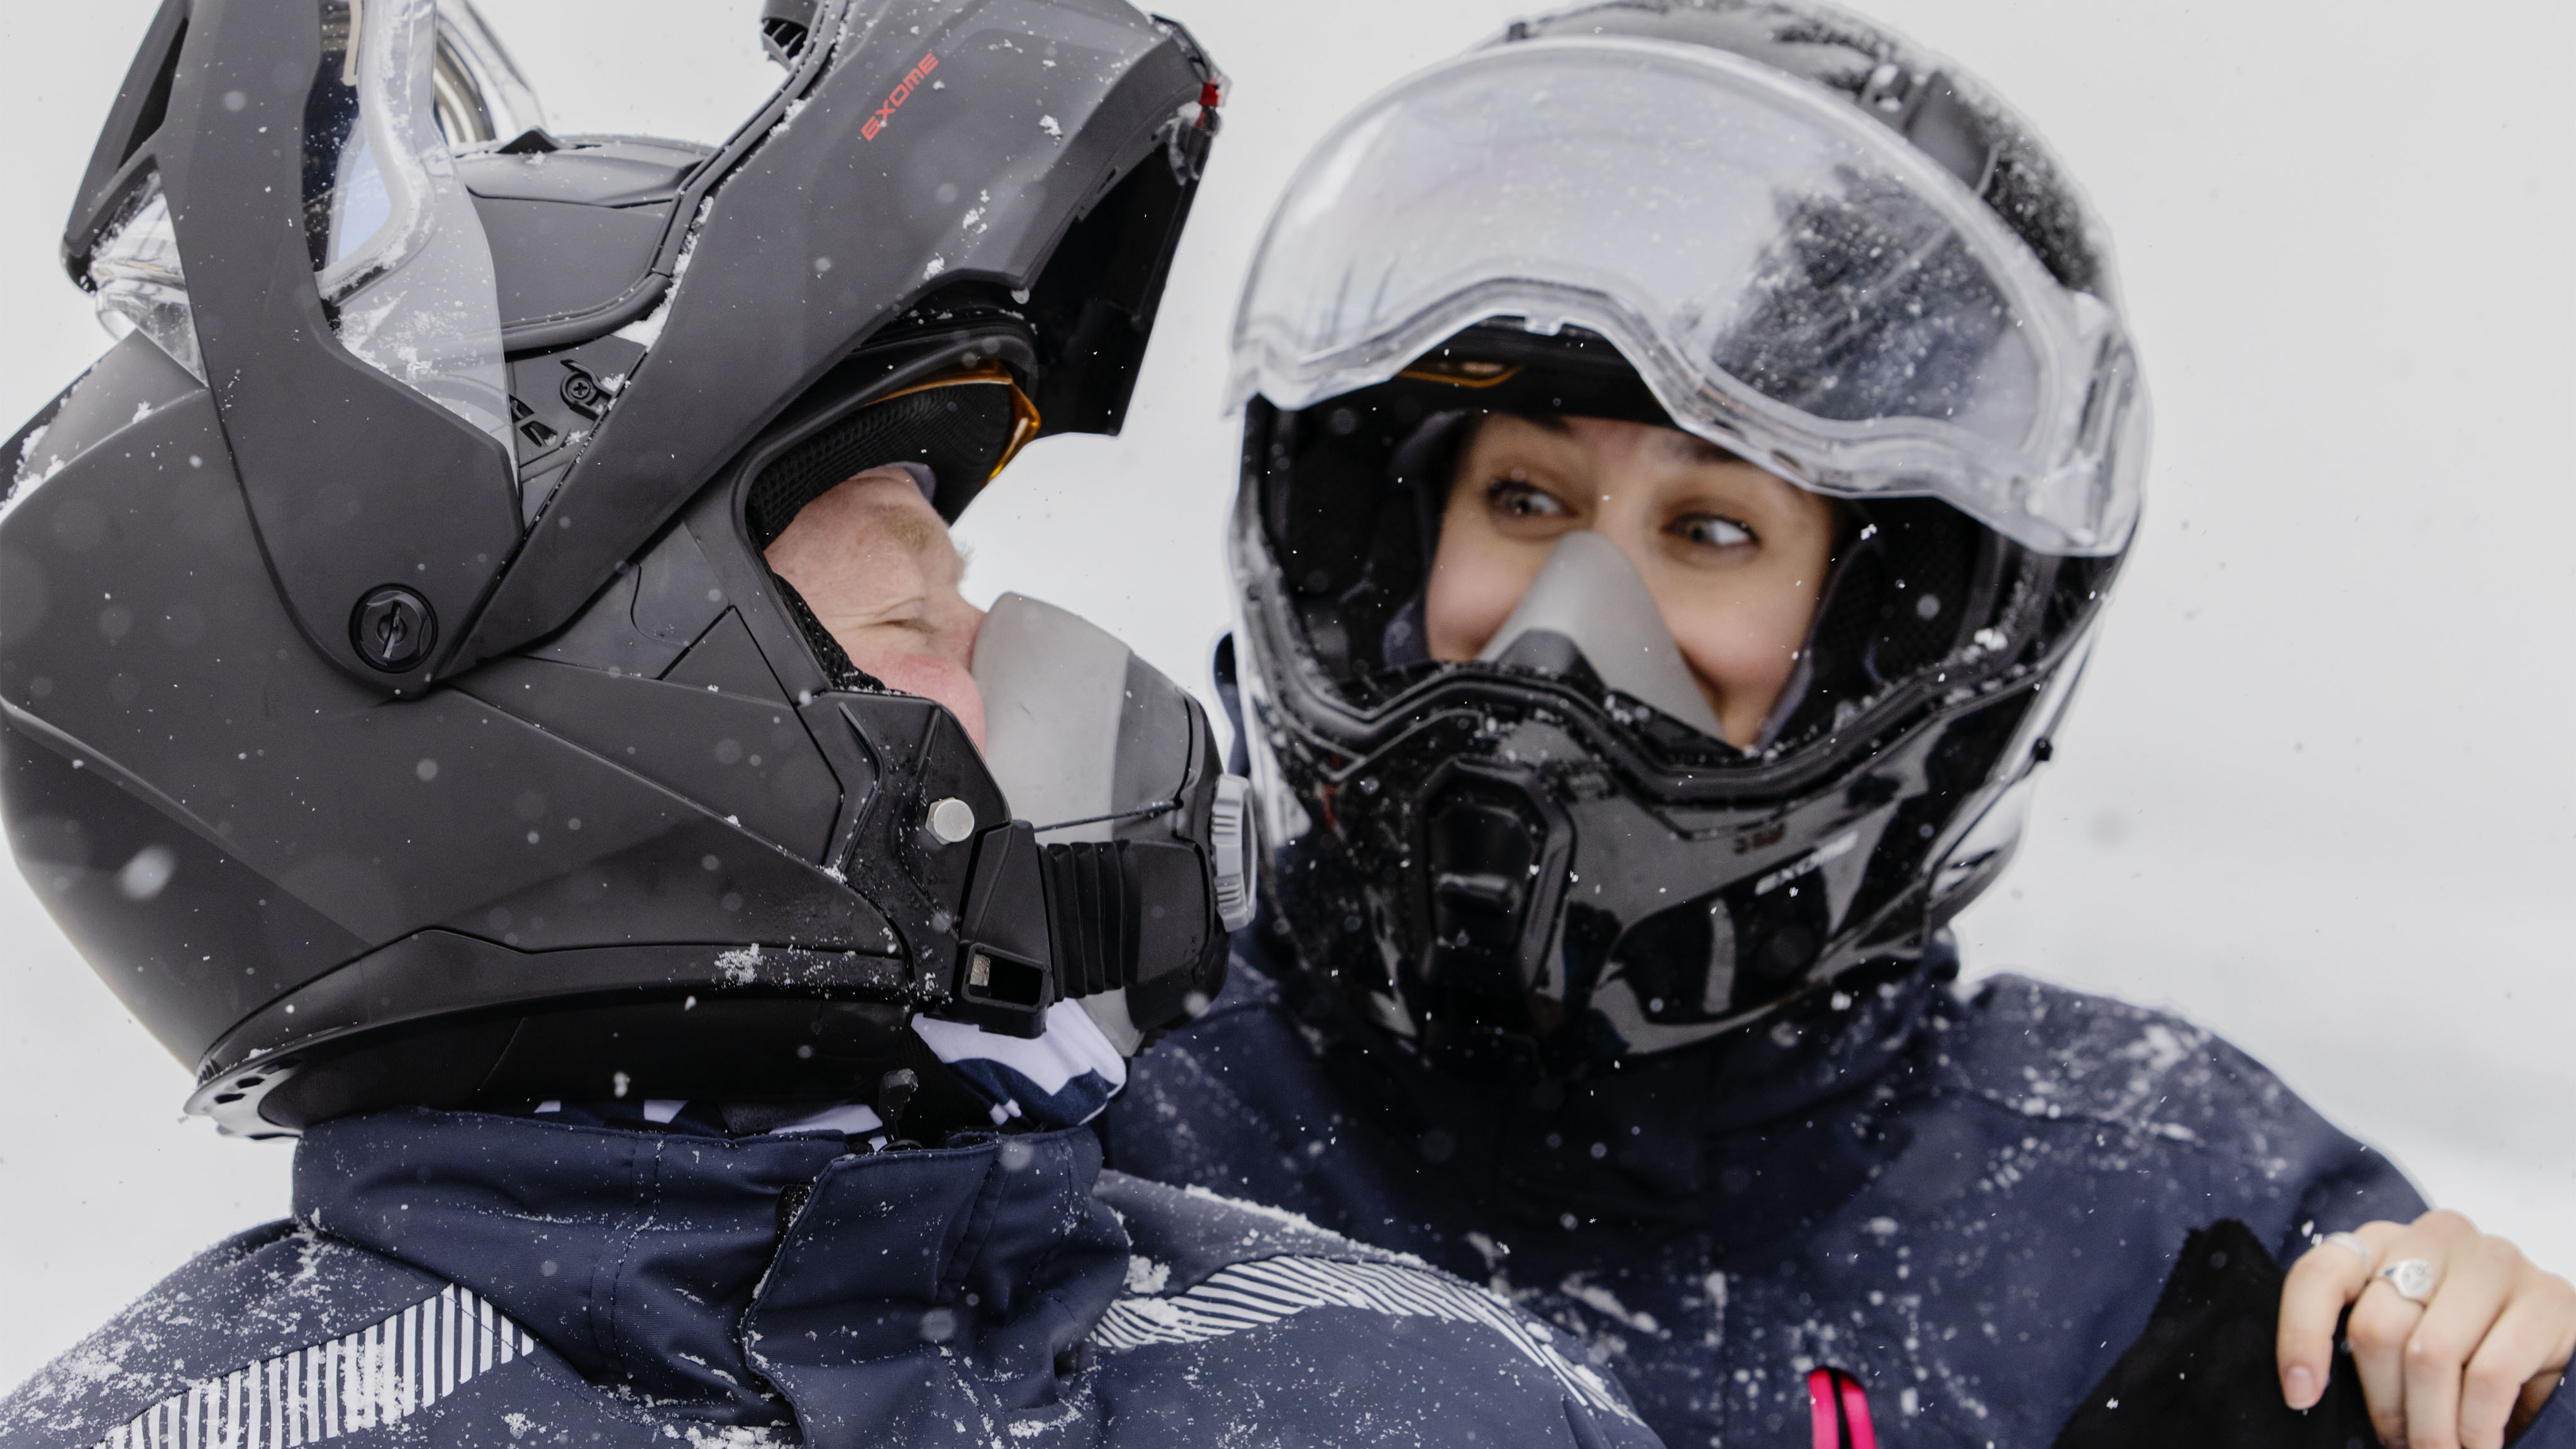 Man wearing Exome Helmet during a snowmobile ride